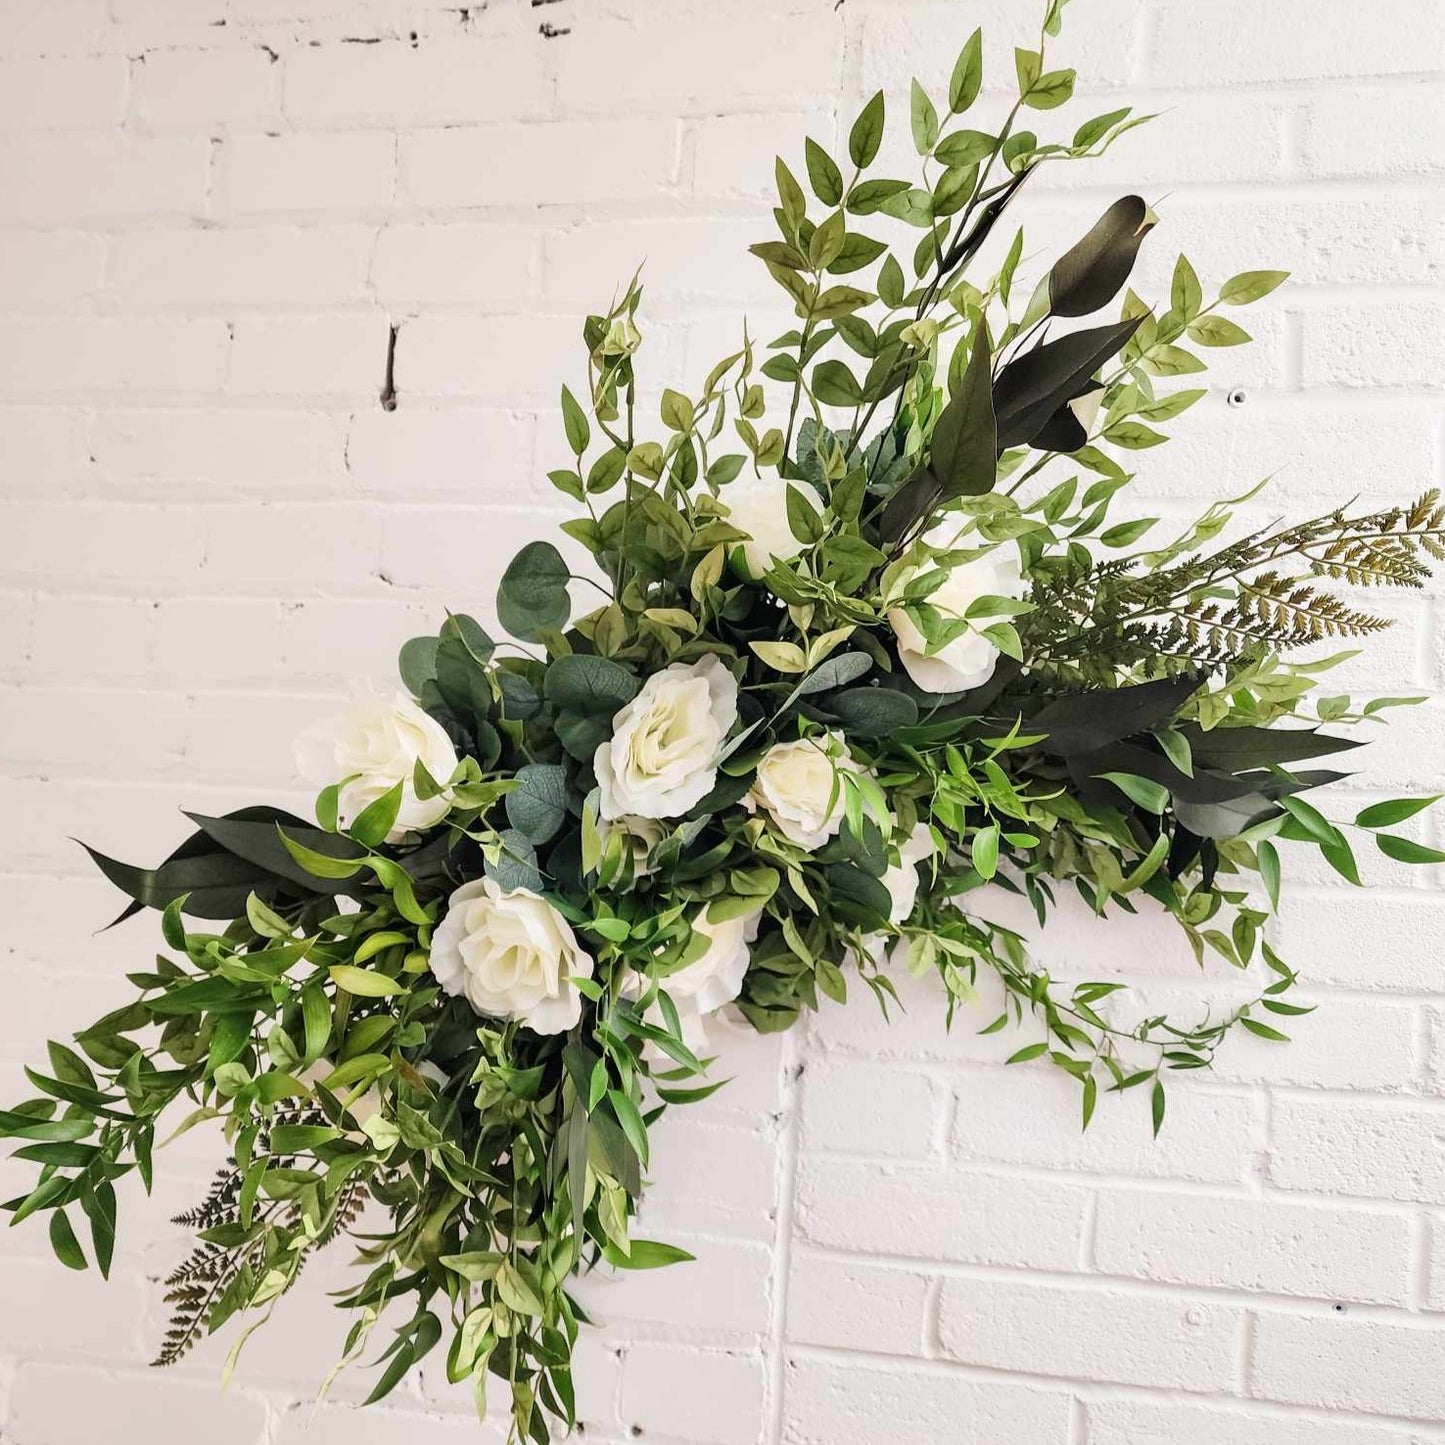 Faux Floral Arch Installation - Whites & Greens